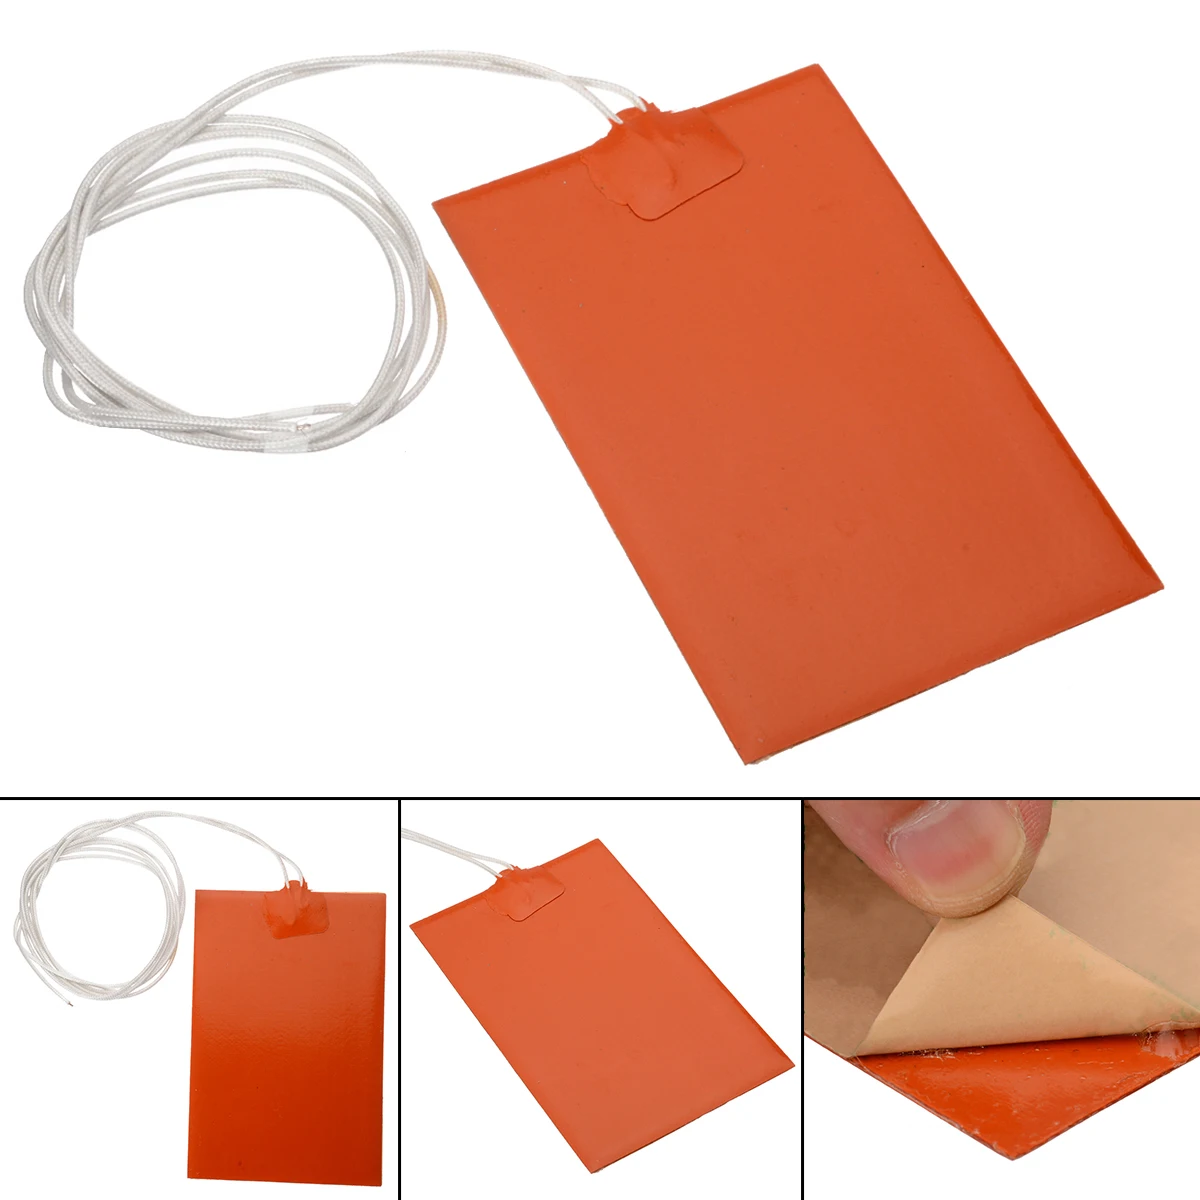 10x15cm 300W 220V Flexible Waterproof Silicone Heater Bed Pad For Warming Accessories Parts